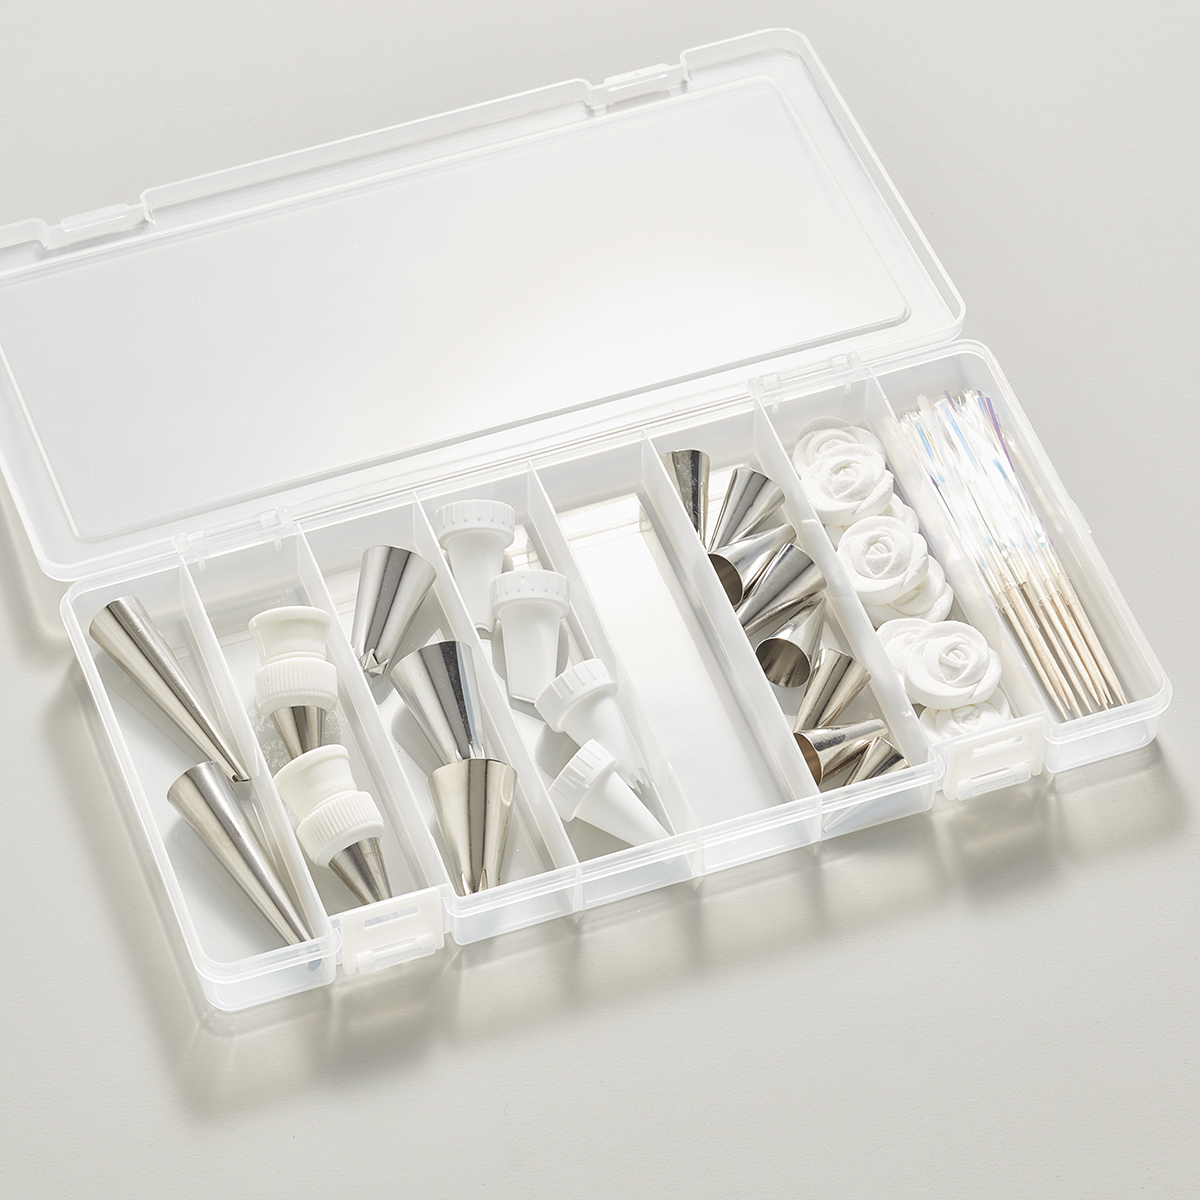 https://www.containerstore.com/catalogimages/466671/10051815-large-8-compartment-box-tra.jpg